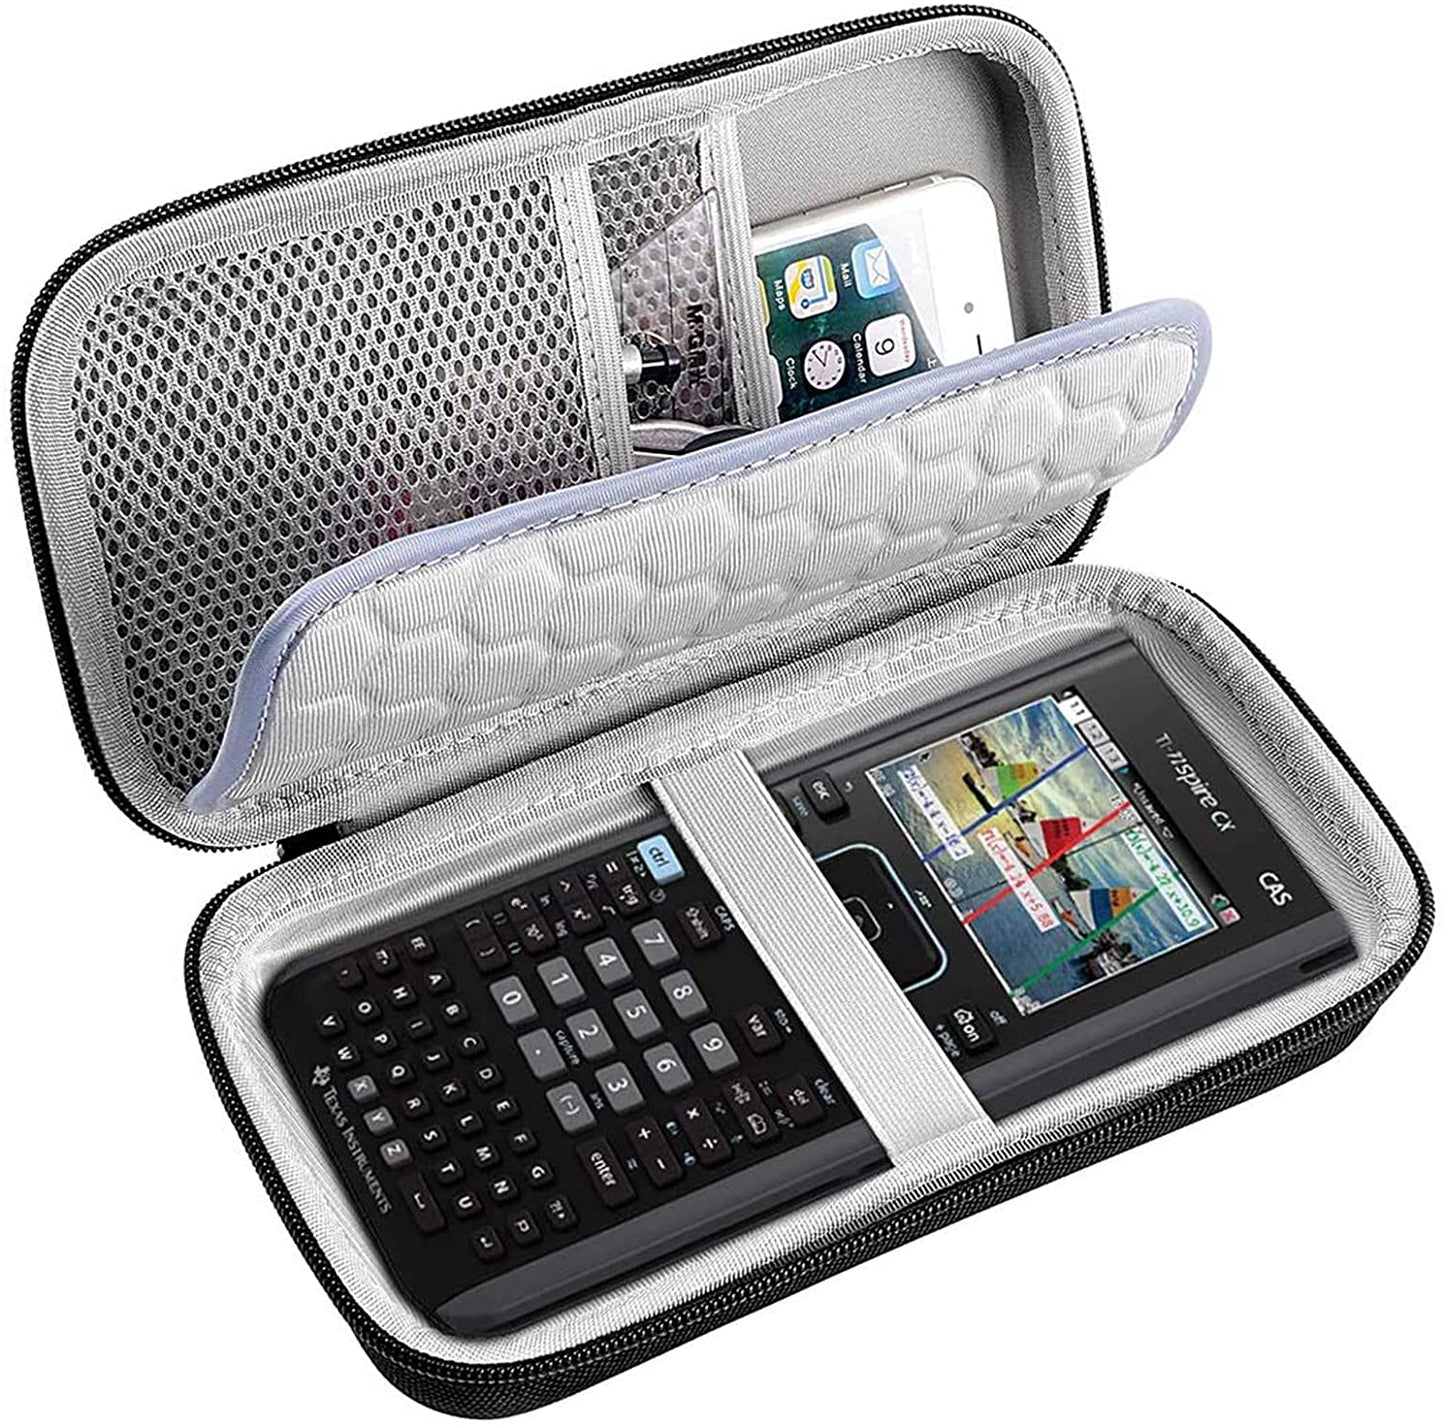 PAIYULE Travel Case for Texas Instruments Ti Nspire CX CAS II Ti-84 Plus CE Graphing Calculator, Large Capacity for Pens, Cables and Other Accessories -Black (Box Only)